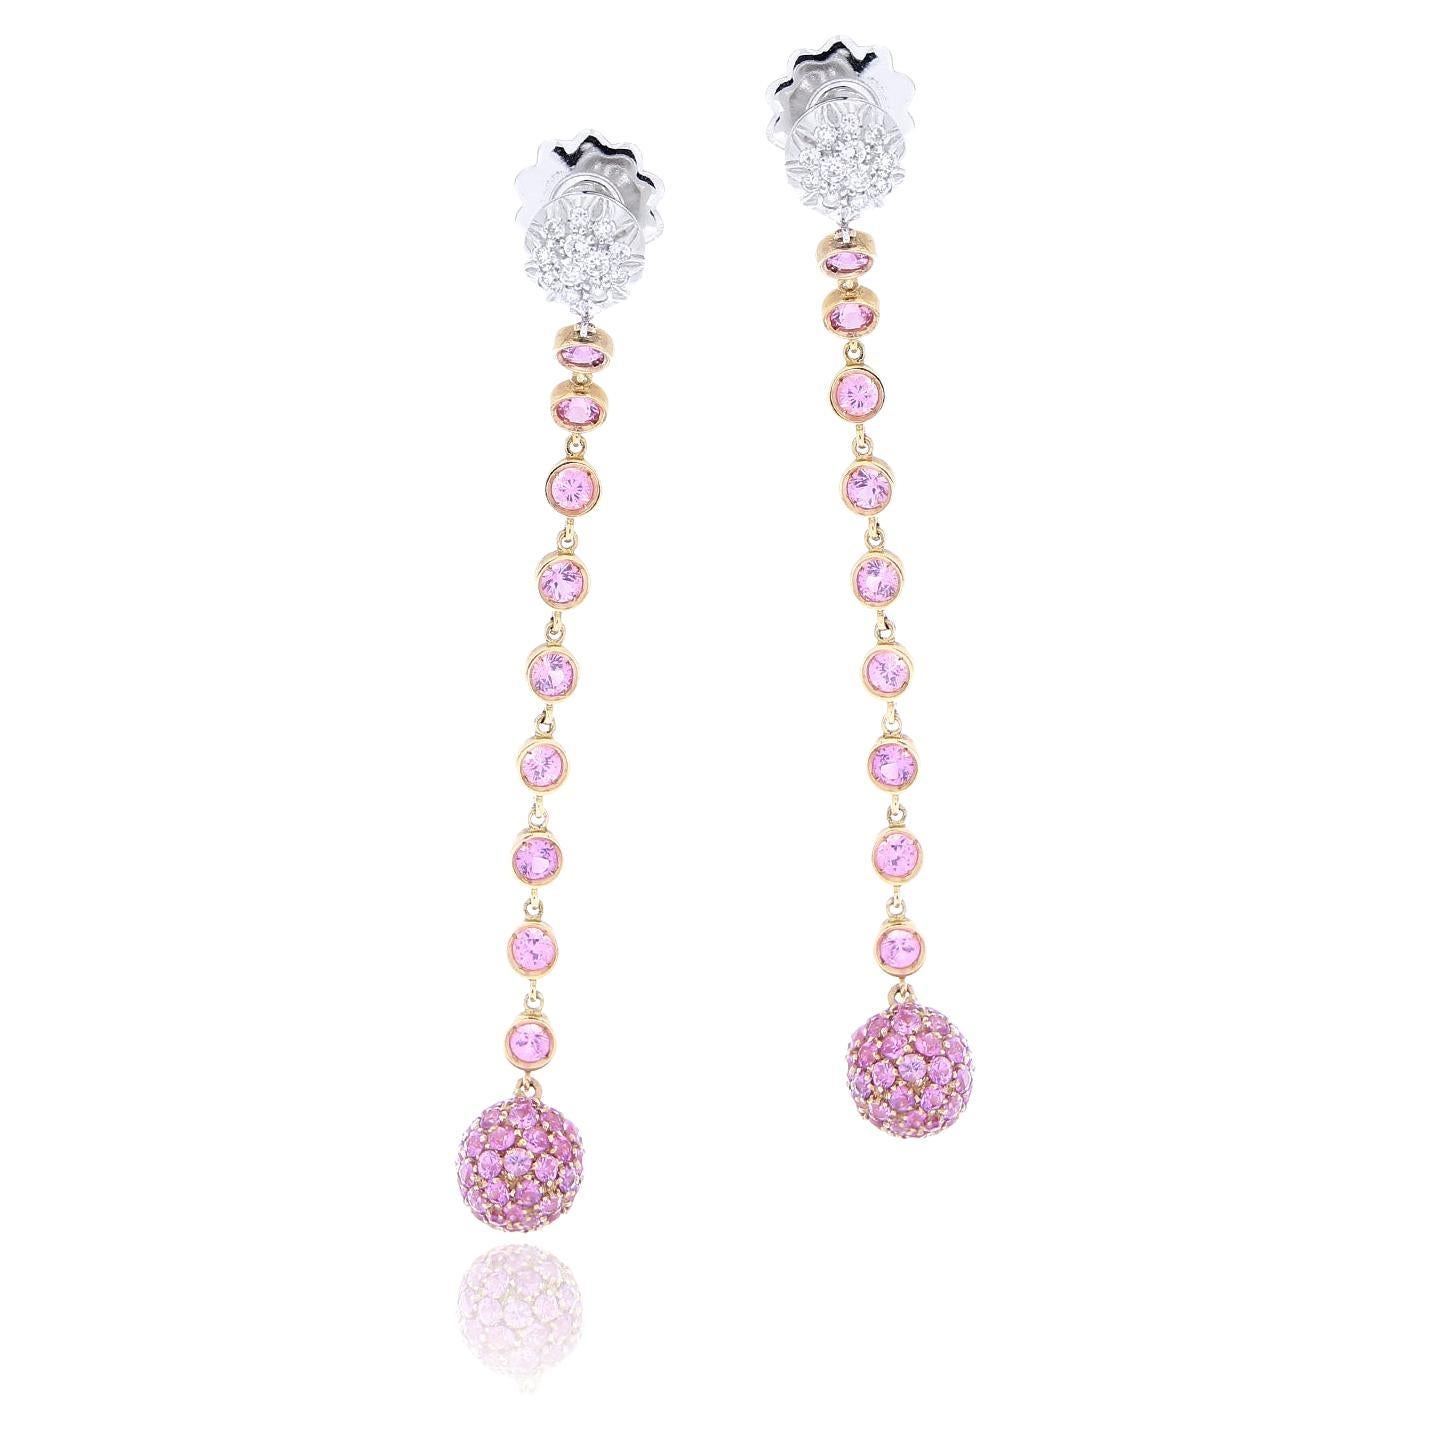 18kt Rose Gold Dangling Earrings Pink Sapphires 4.76 Ct & White Diamonds 0.48 Ct For Sale